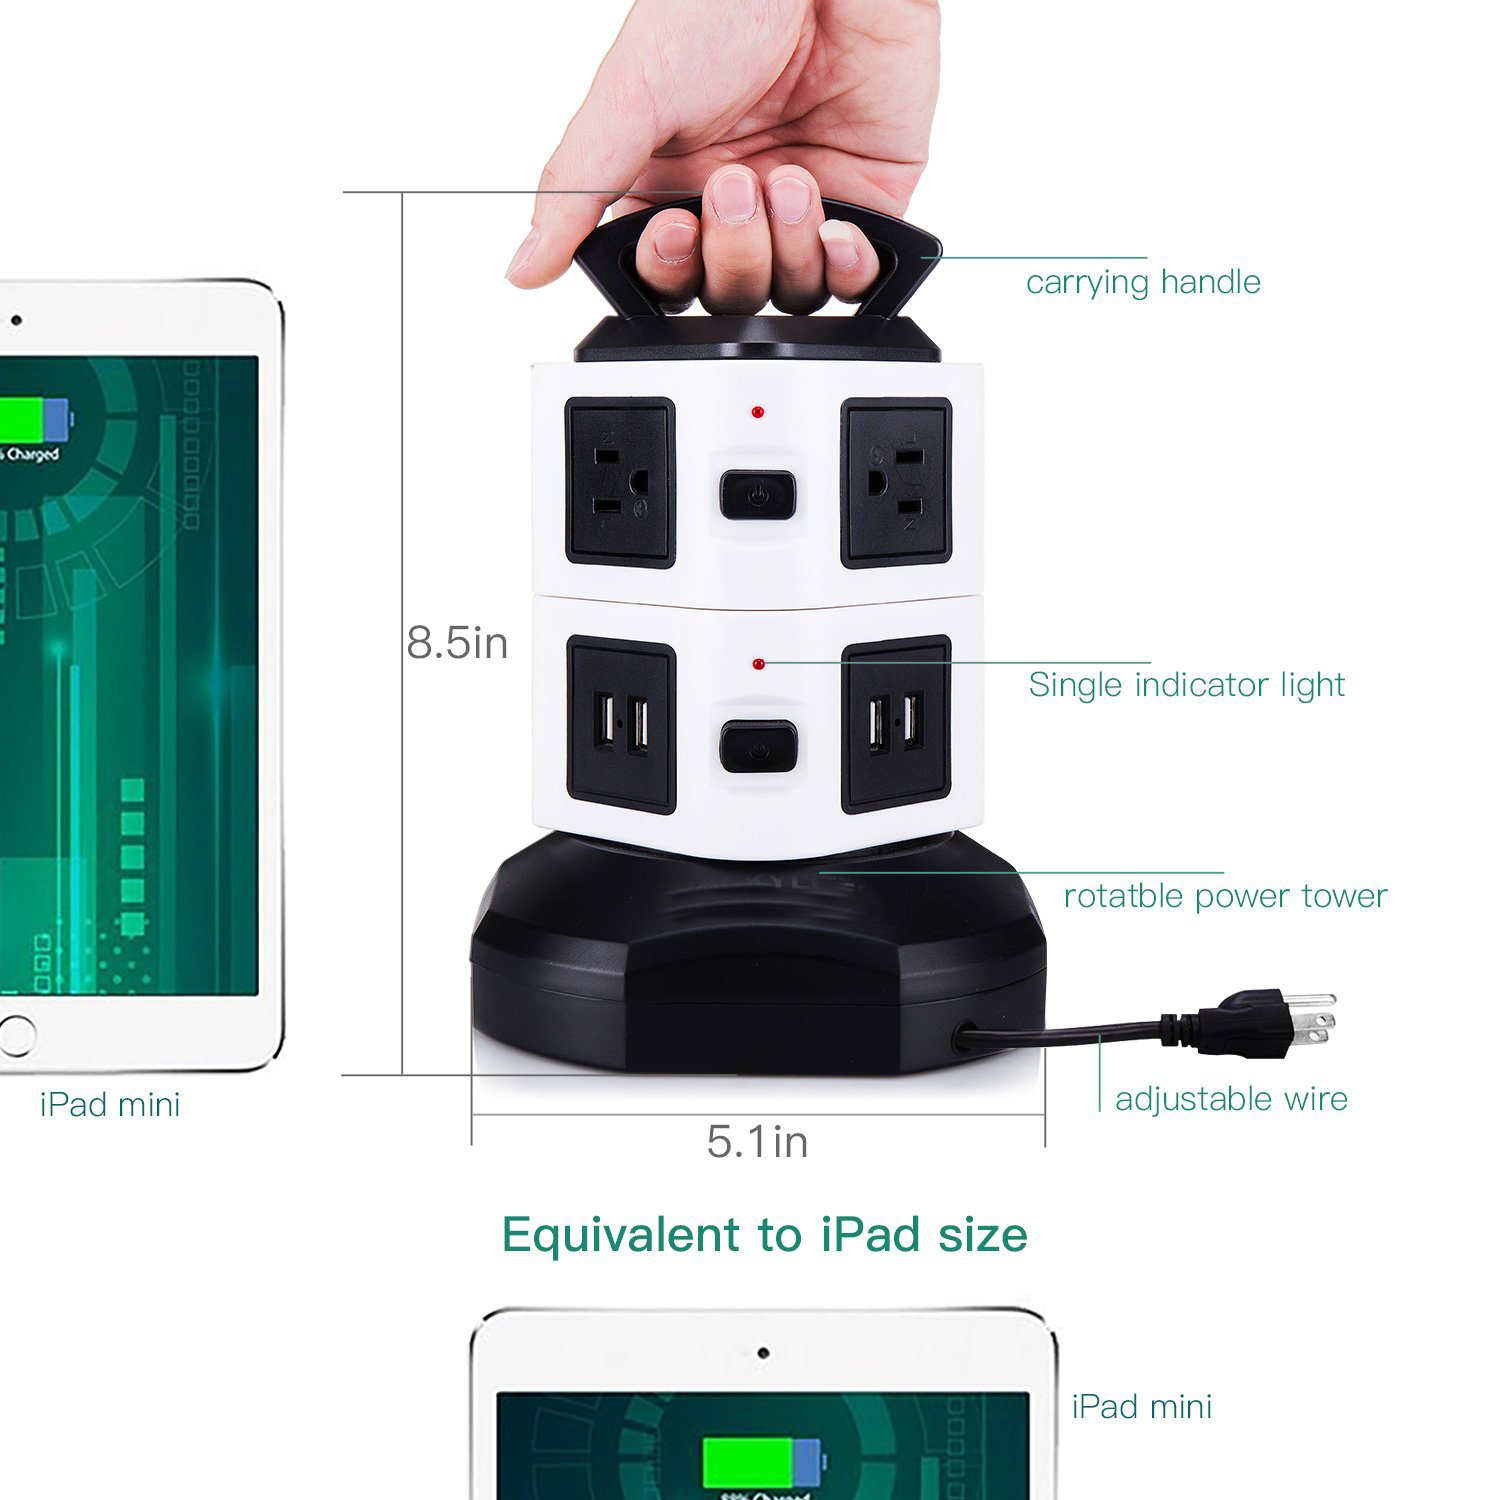 USB Power Strip Protector Electric Charge Station Plugs Socket 4 USB Slot Extension Cord